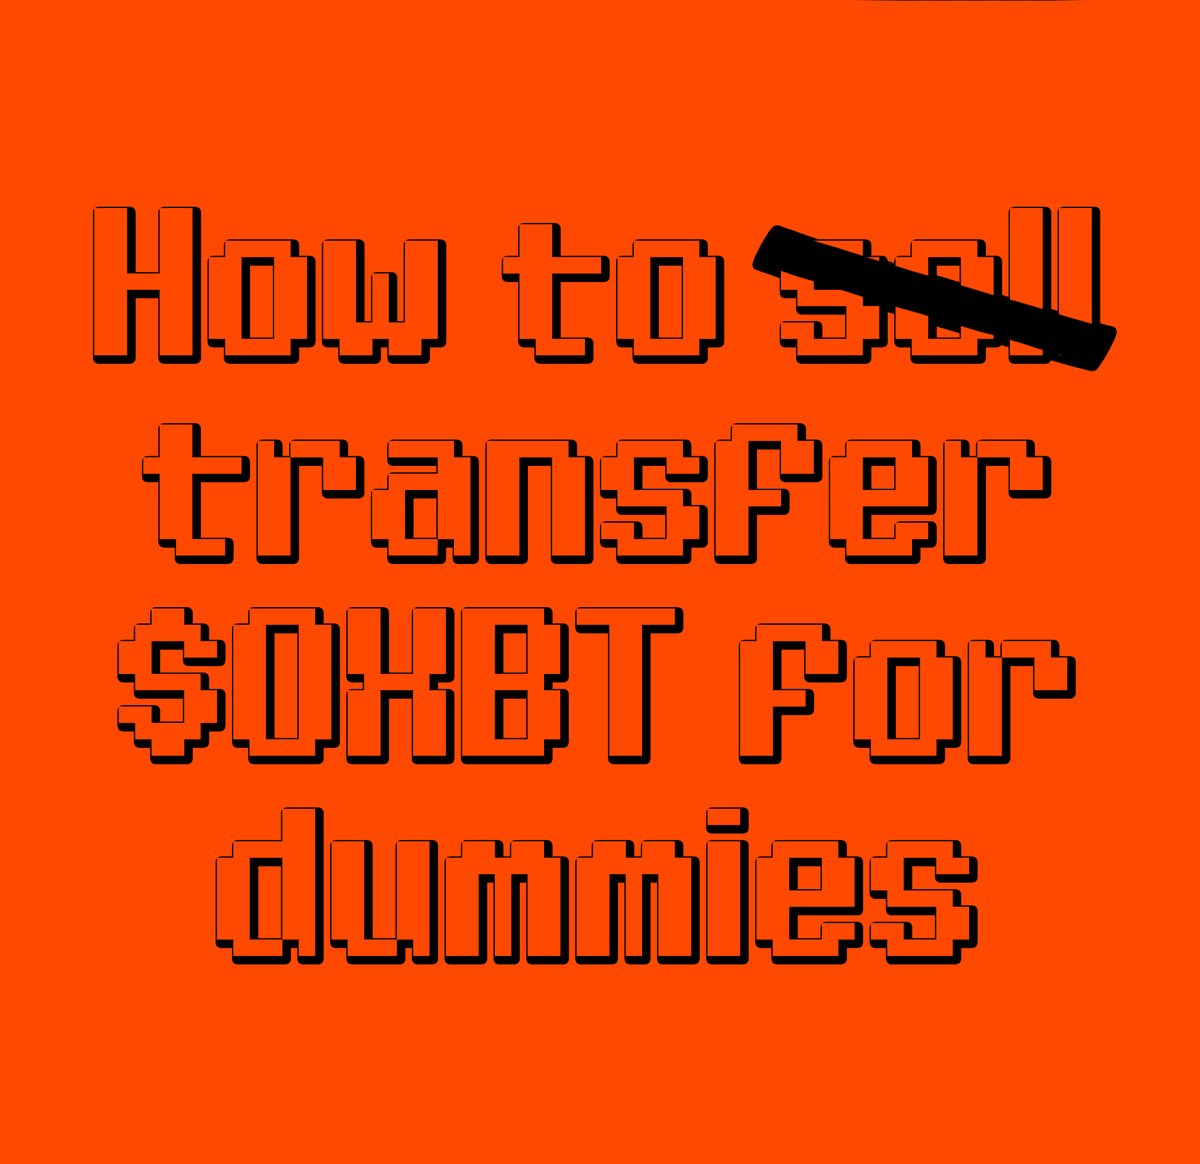 Know about BRC-20's, where/how to buy 'em, but don't know how to 🟧🟧🟧🟧 or transfer?   

Let me explain with the example of 🟧🟧🟧🟧 transfering $OXBT 

Here is a simple guide in a few steps that even a child can figure out.